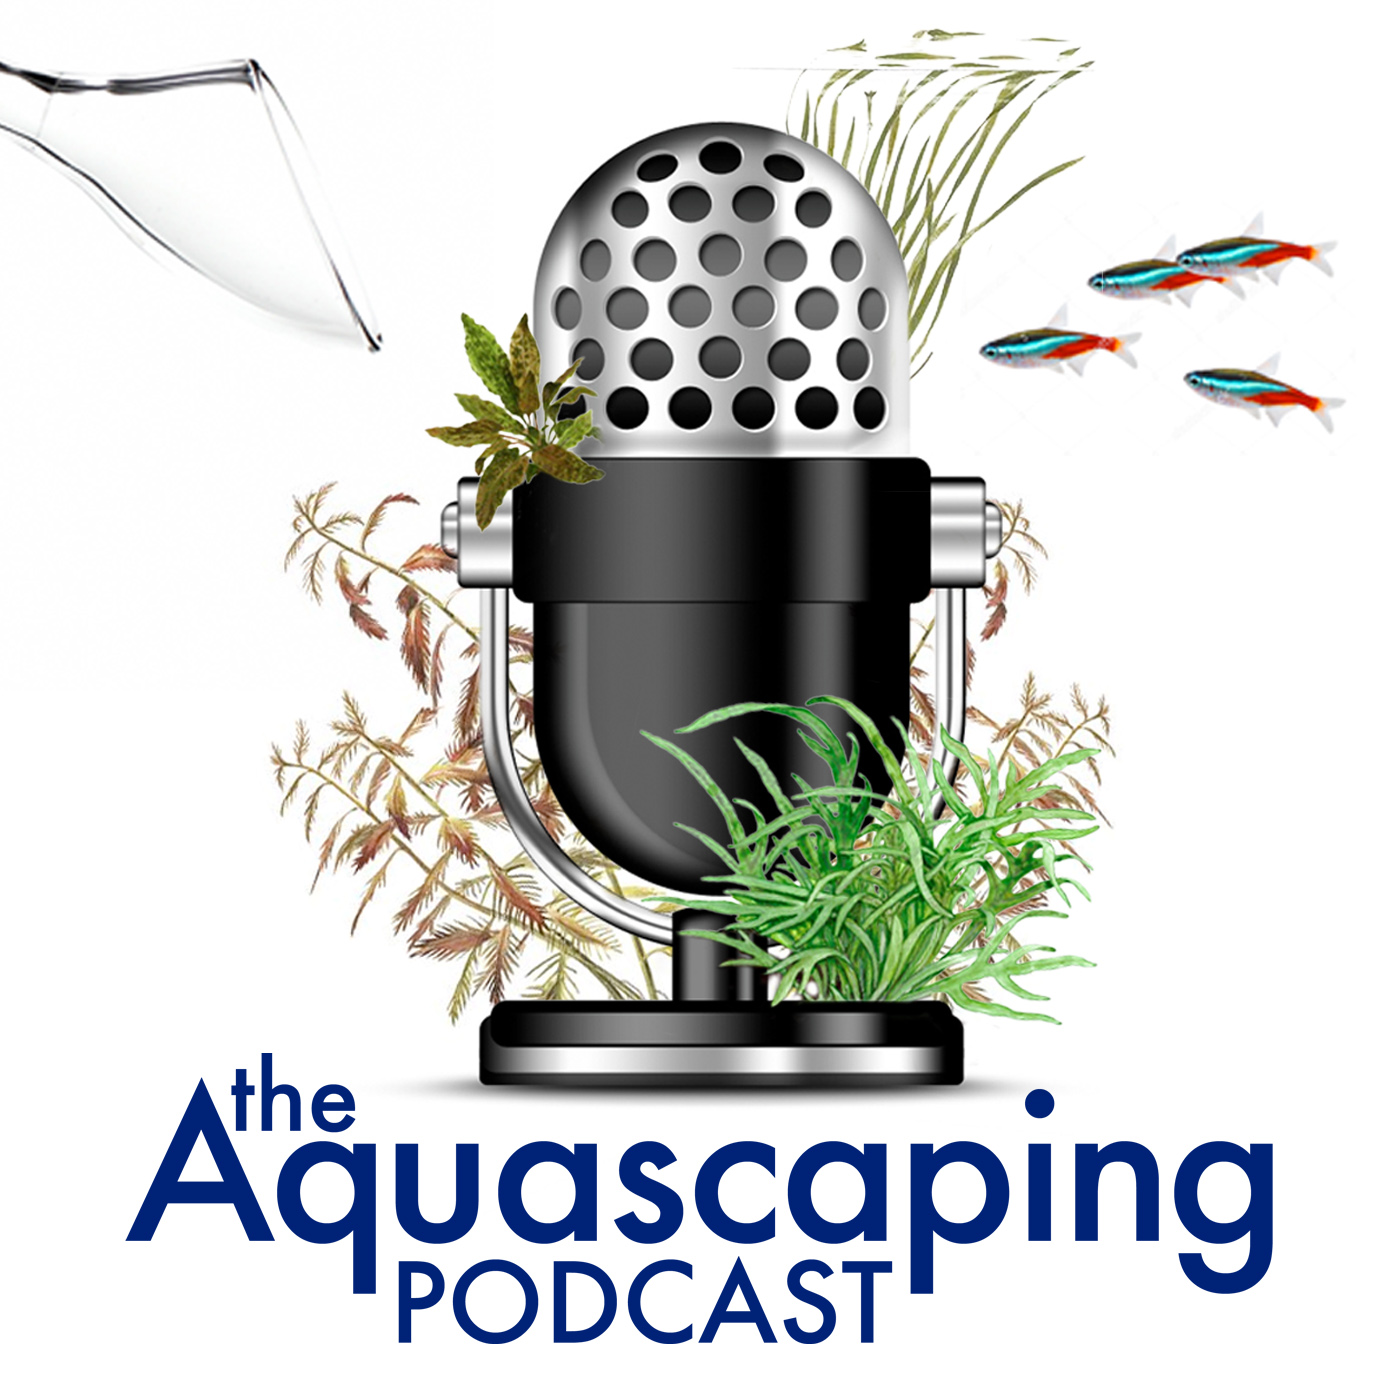 The Aquascaping Podcast